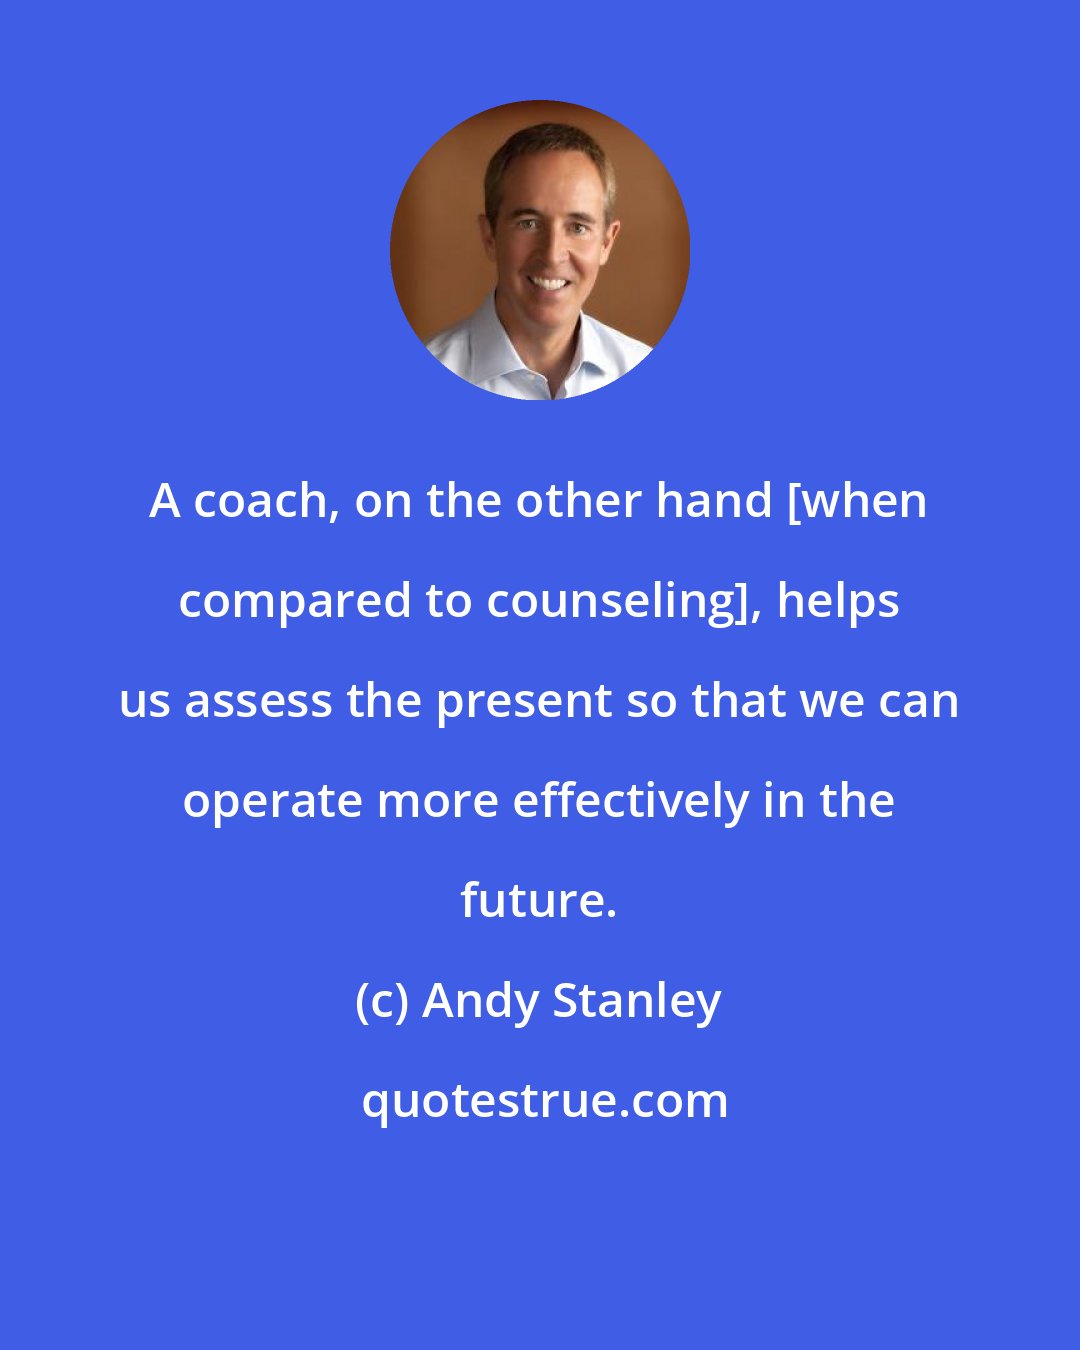 Andy Stanley: A coach, on the other hand [when compared to counseling], helps us assess the present so that we can operate more effectively in the future.